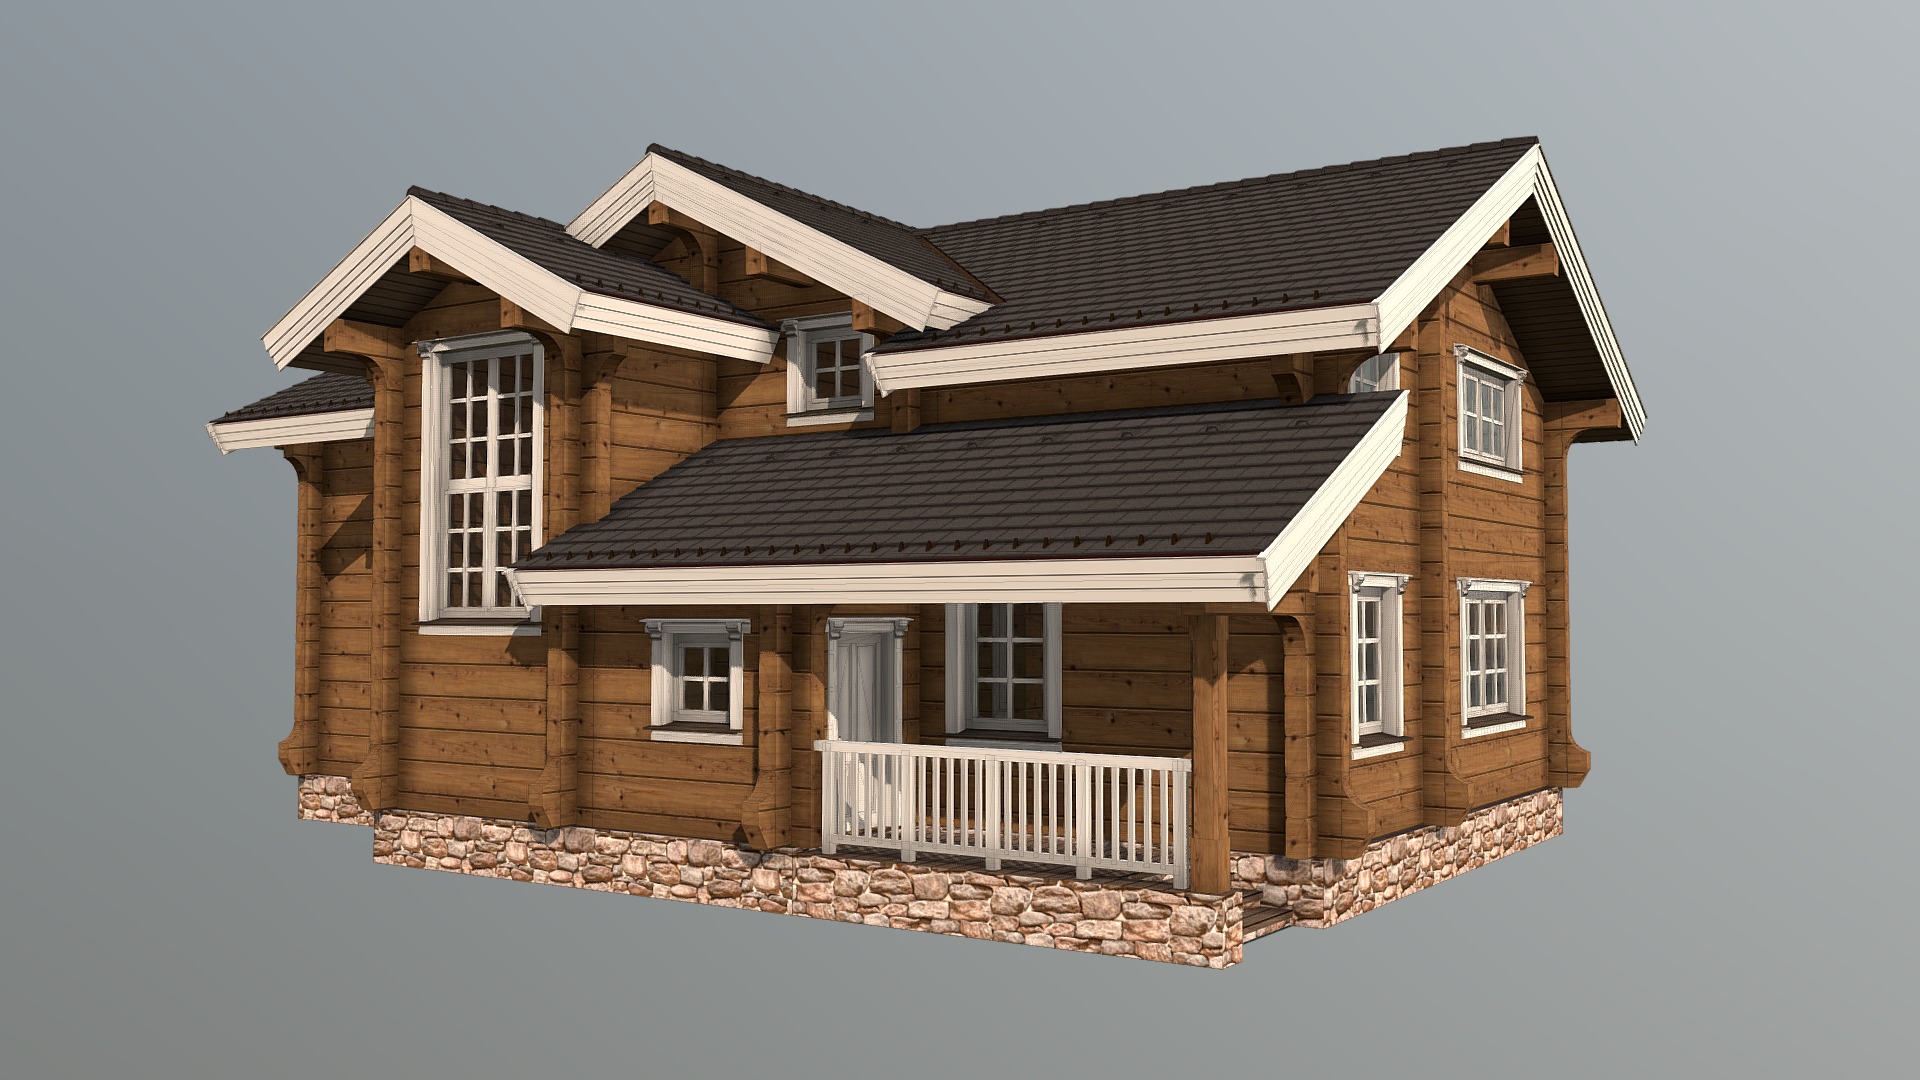 3D model Богучаров - This is a 3D model of the Богучаров. The 3D model is about a house with a white fence.